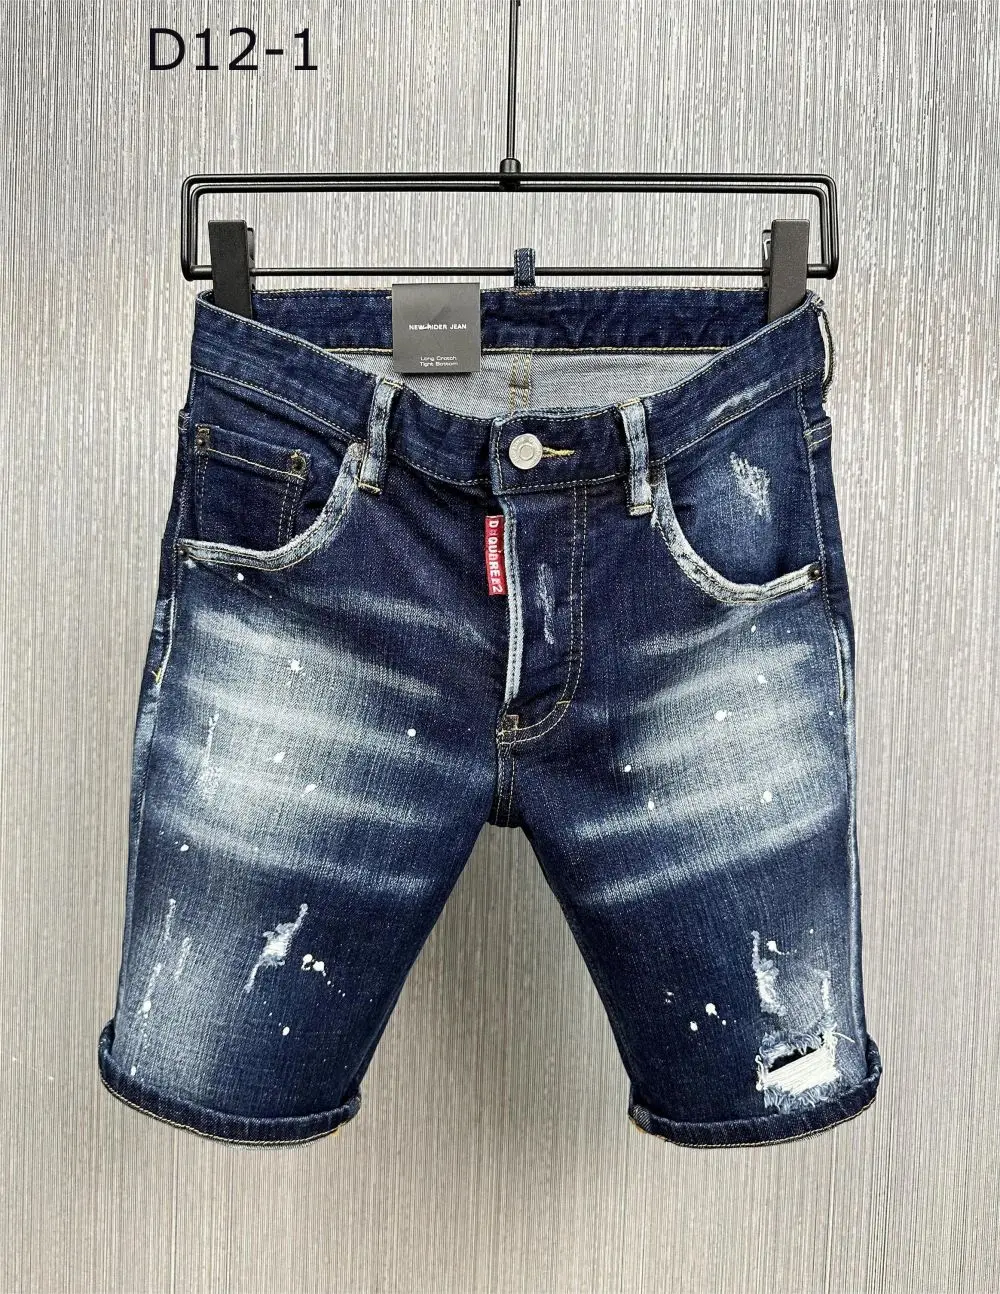 

2023 new fashion tide brand men's washing worn holes handsome motorcycle jeans D12-1